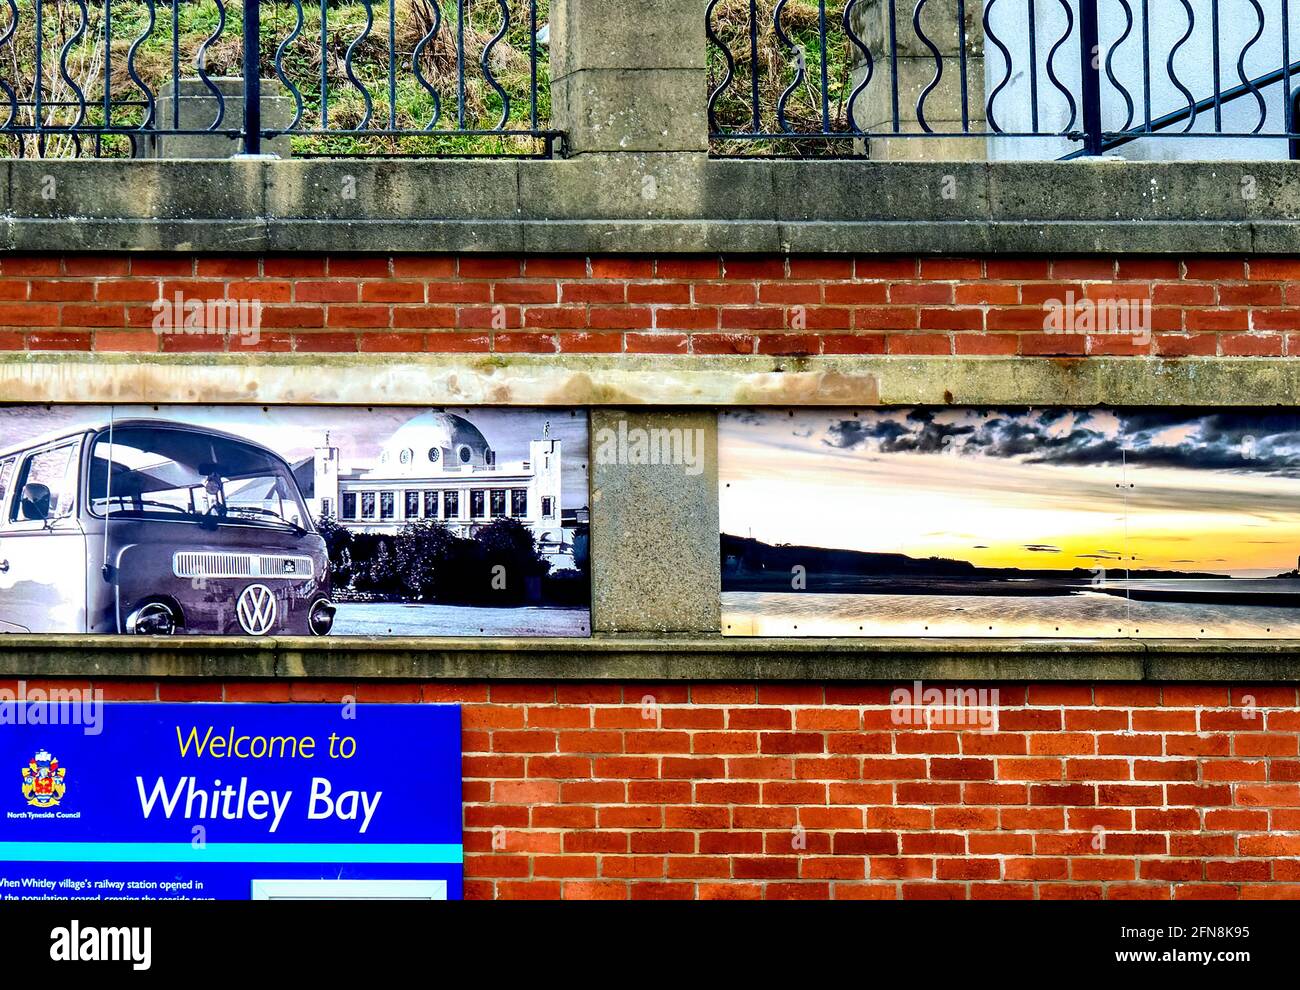 Plakate an der Wand in Whitley Bay, im Norden Englands. Stockfoto